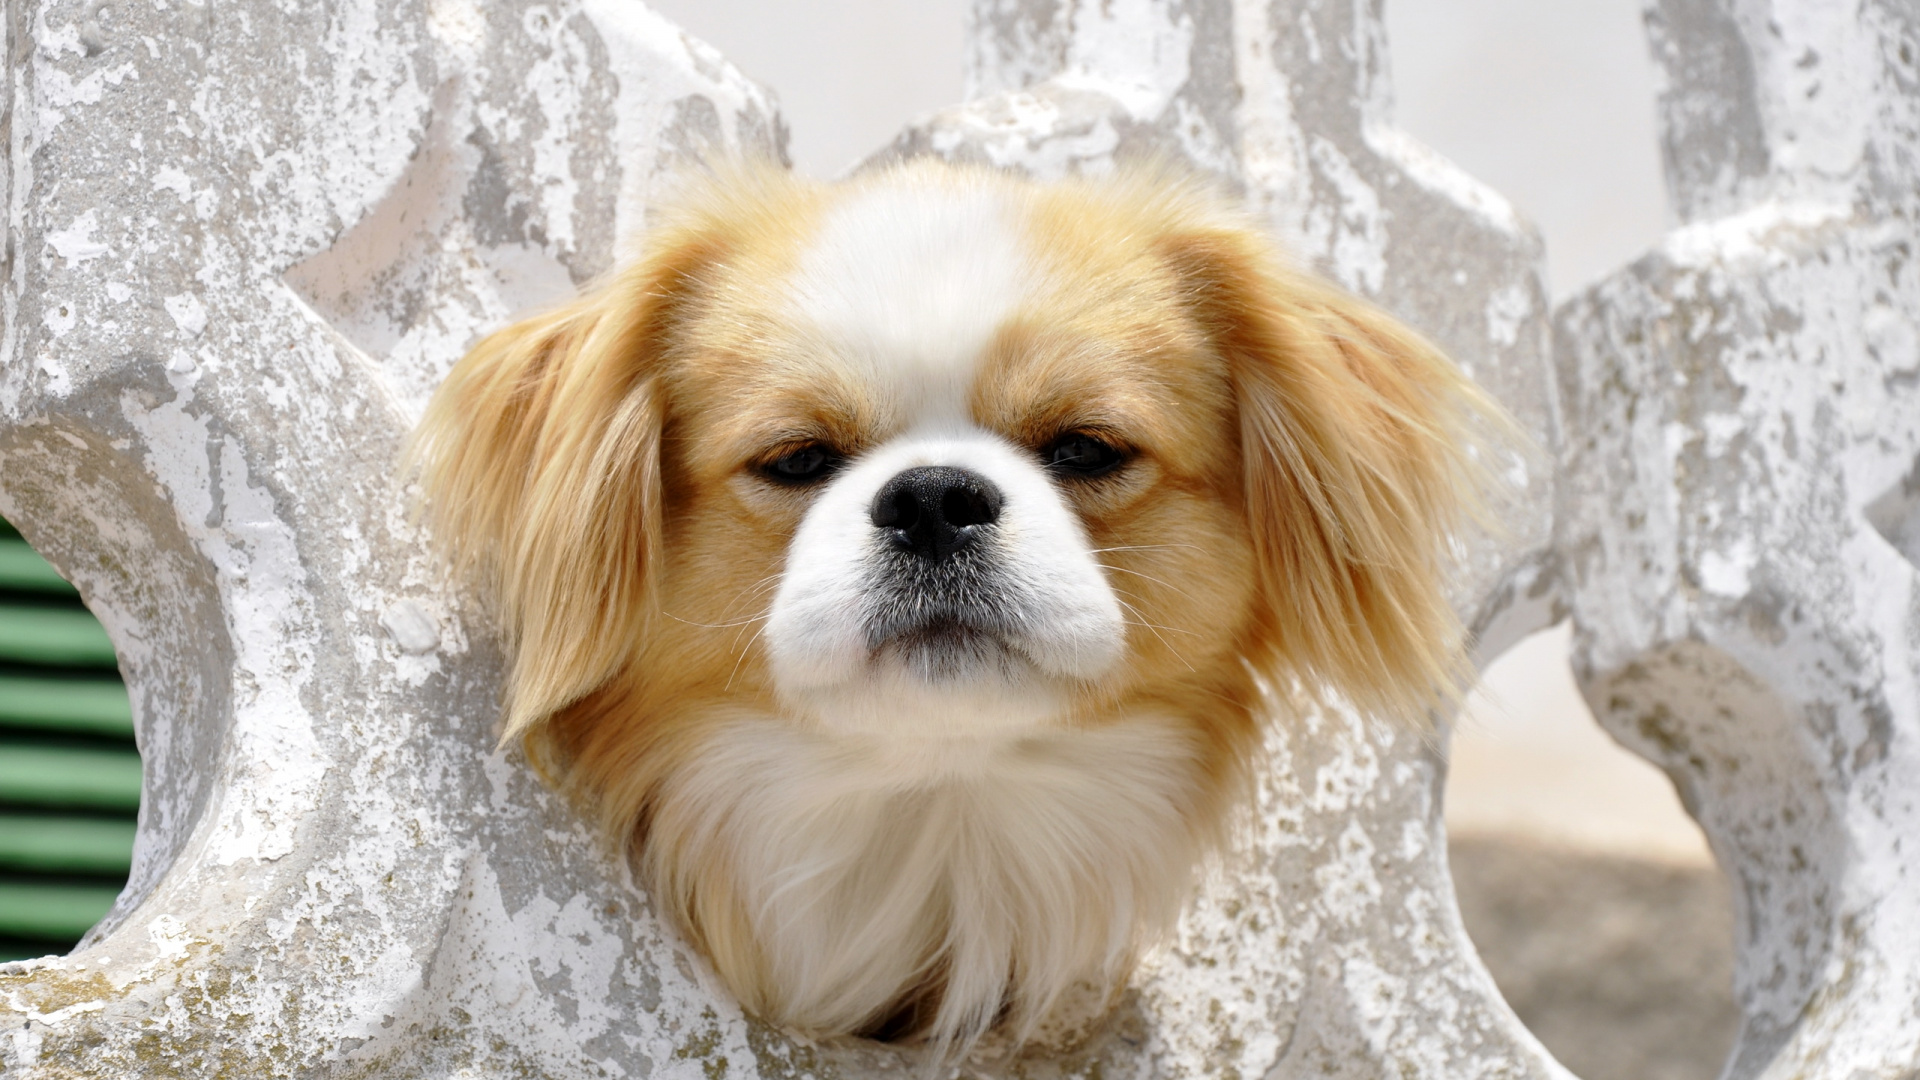 White and Brown Long Haired Small Dog. Wallpaper in 1920x1080 Resolution